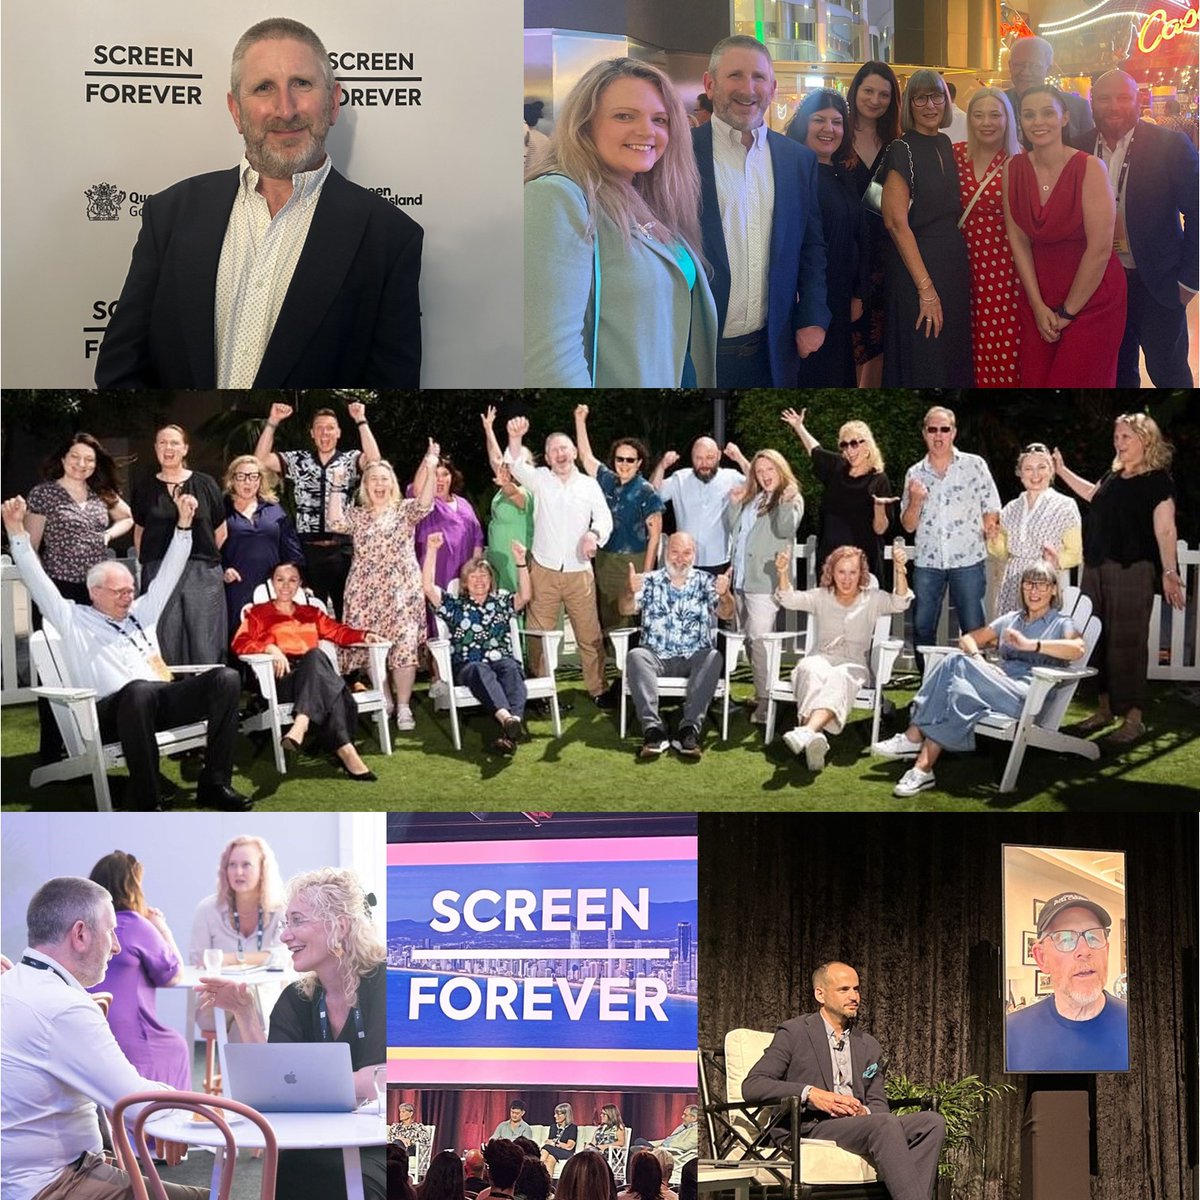 PRELUDE's @paulfitzsimons was delighted to be invited by @screenproducers Ireland, @screen_producer Australia & @screen_QLD to be part of the #IrelandConnect delegation to #ScreenForever, #Australia's annual #Film and #TV #conference. Details at preludecontent.com/news.